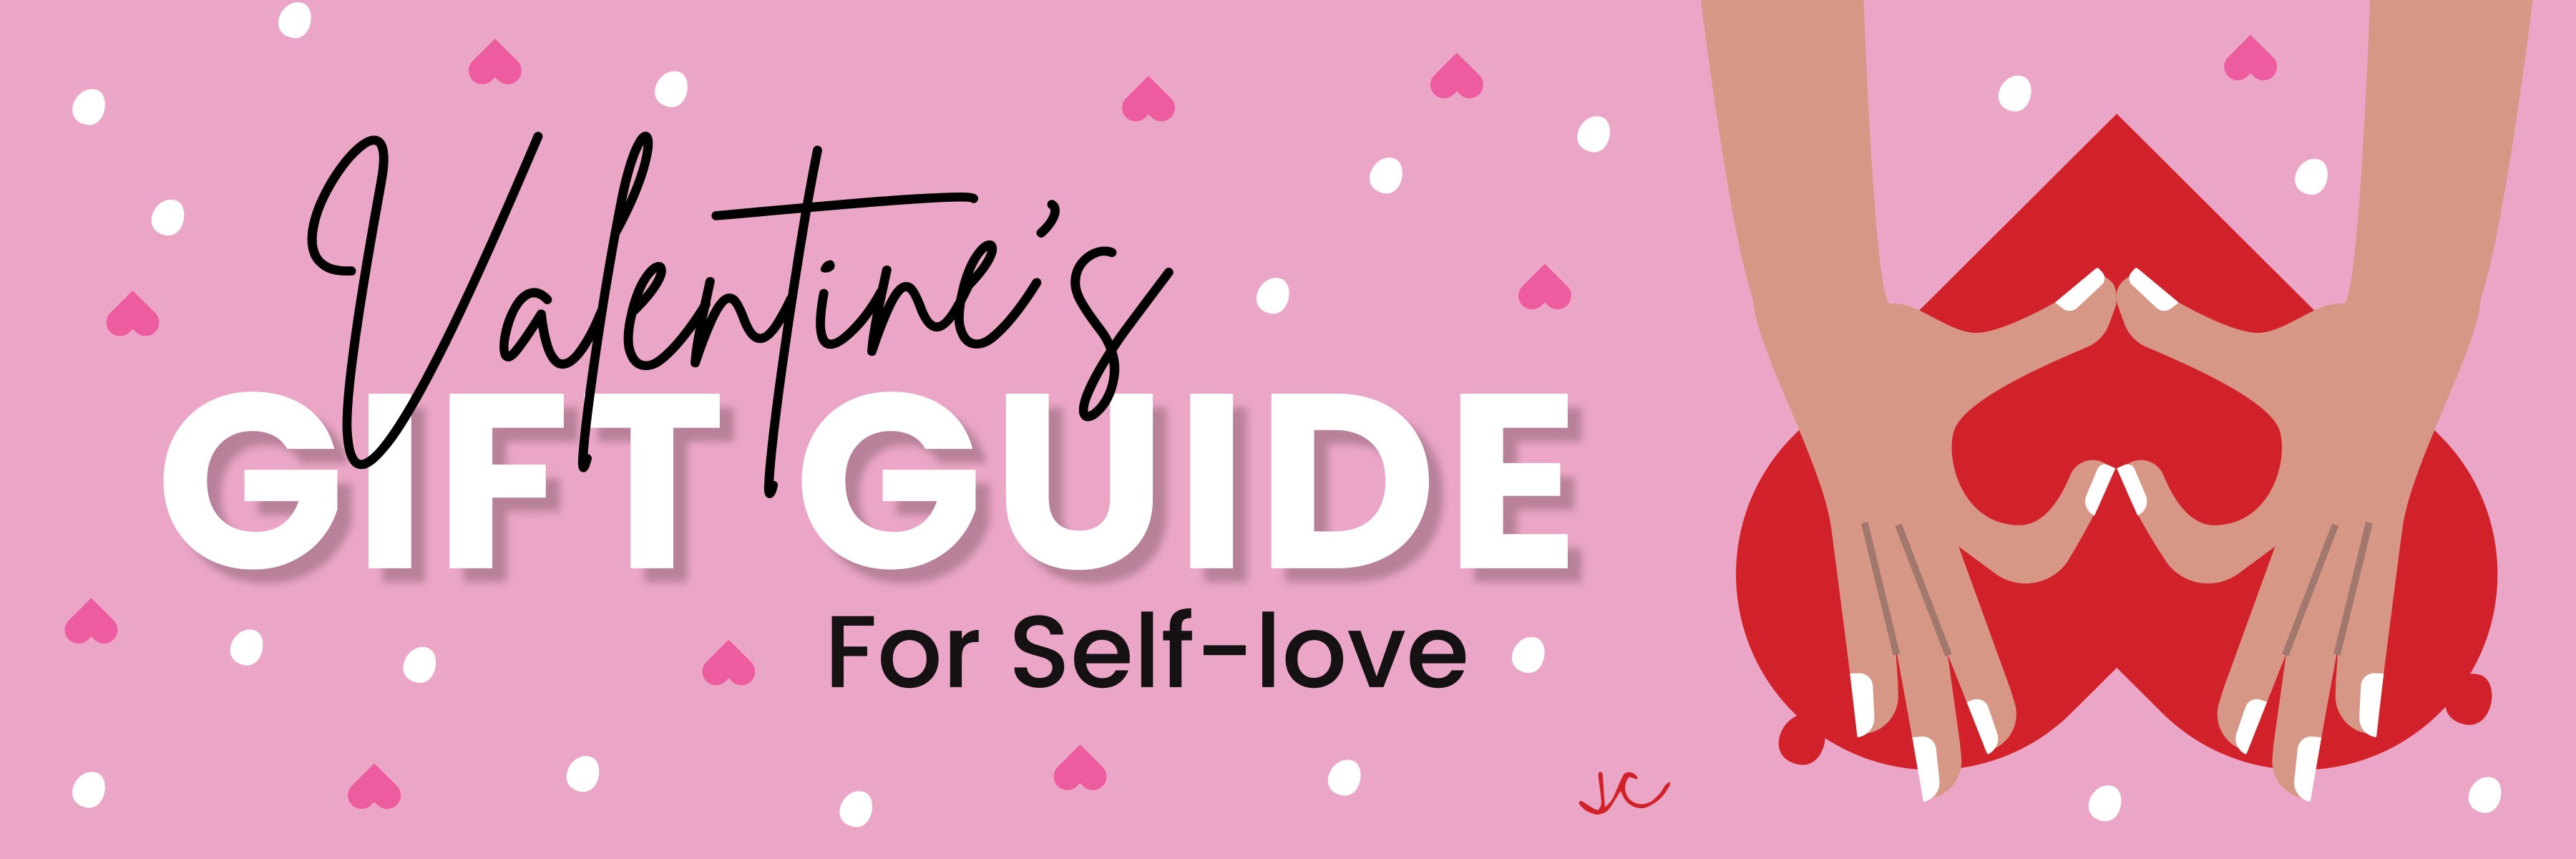 You're the Tits: Valentine's Gift Guide for Self-love